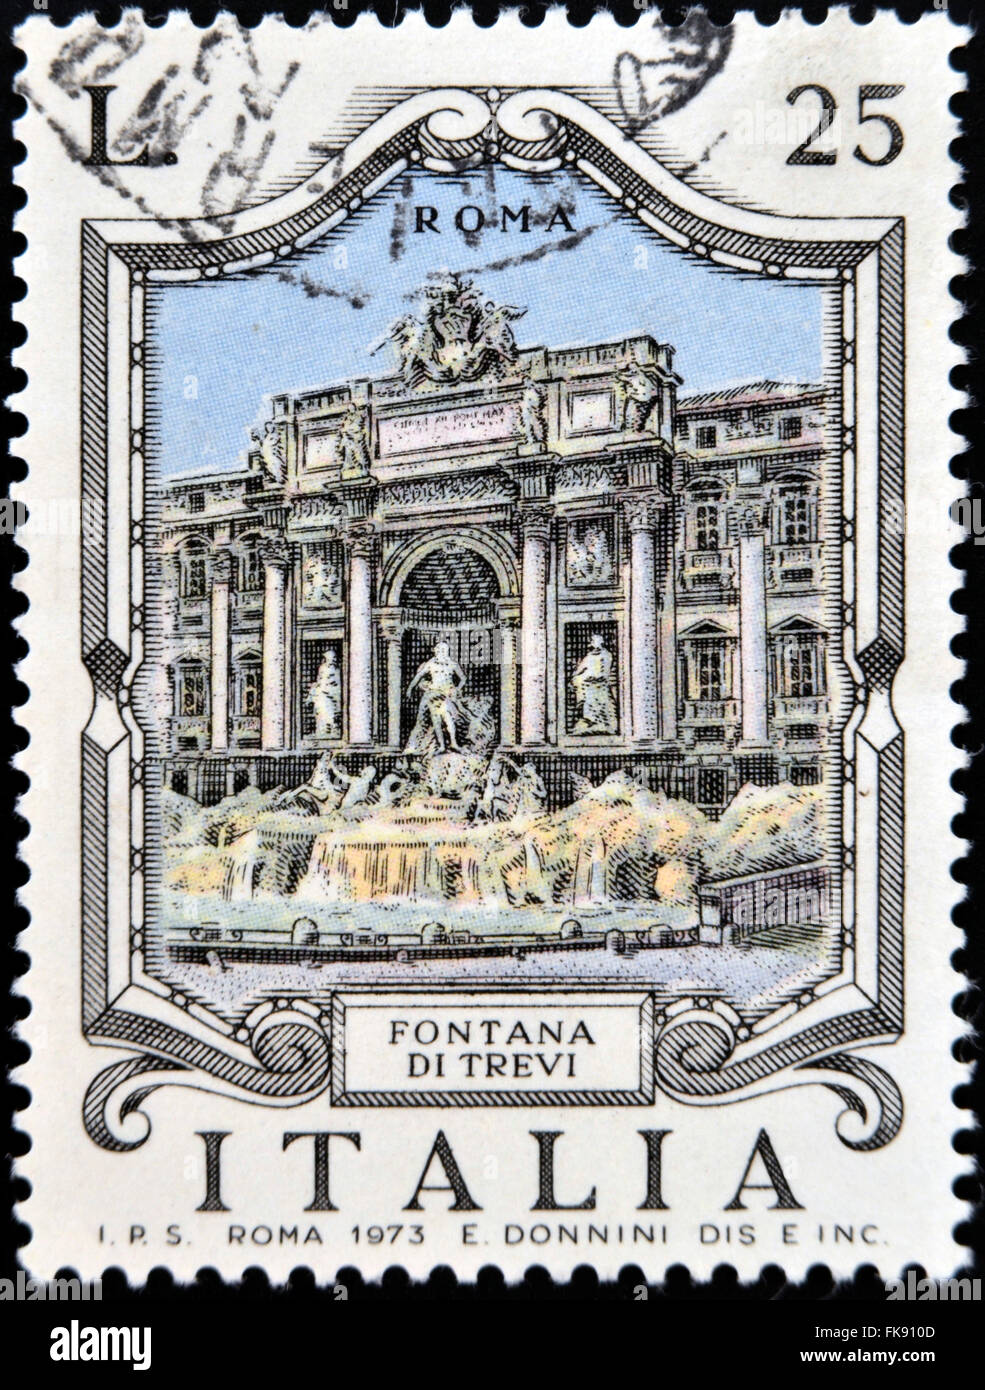 ITALY - CIRCA 1973: a stamp printed in Italy shows illustration of Fontana di Trevi in Rome, circa 1973 Stock Photo